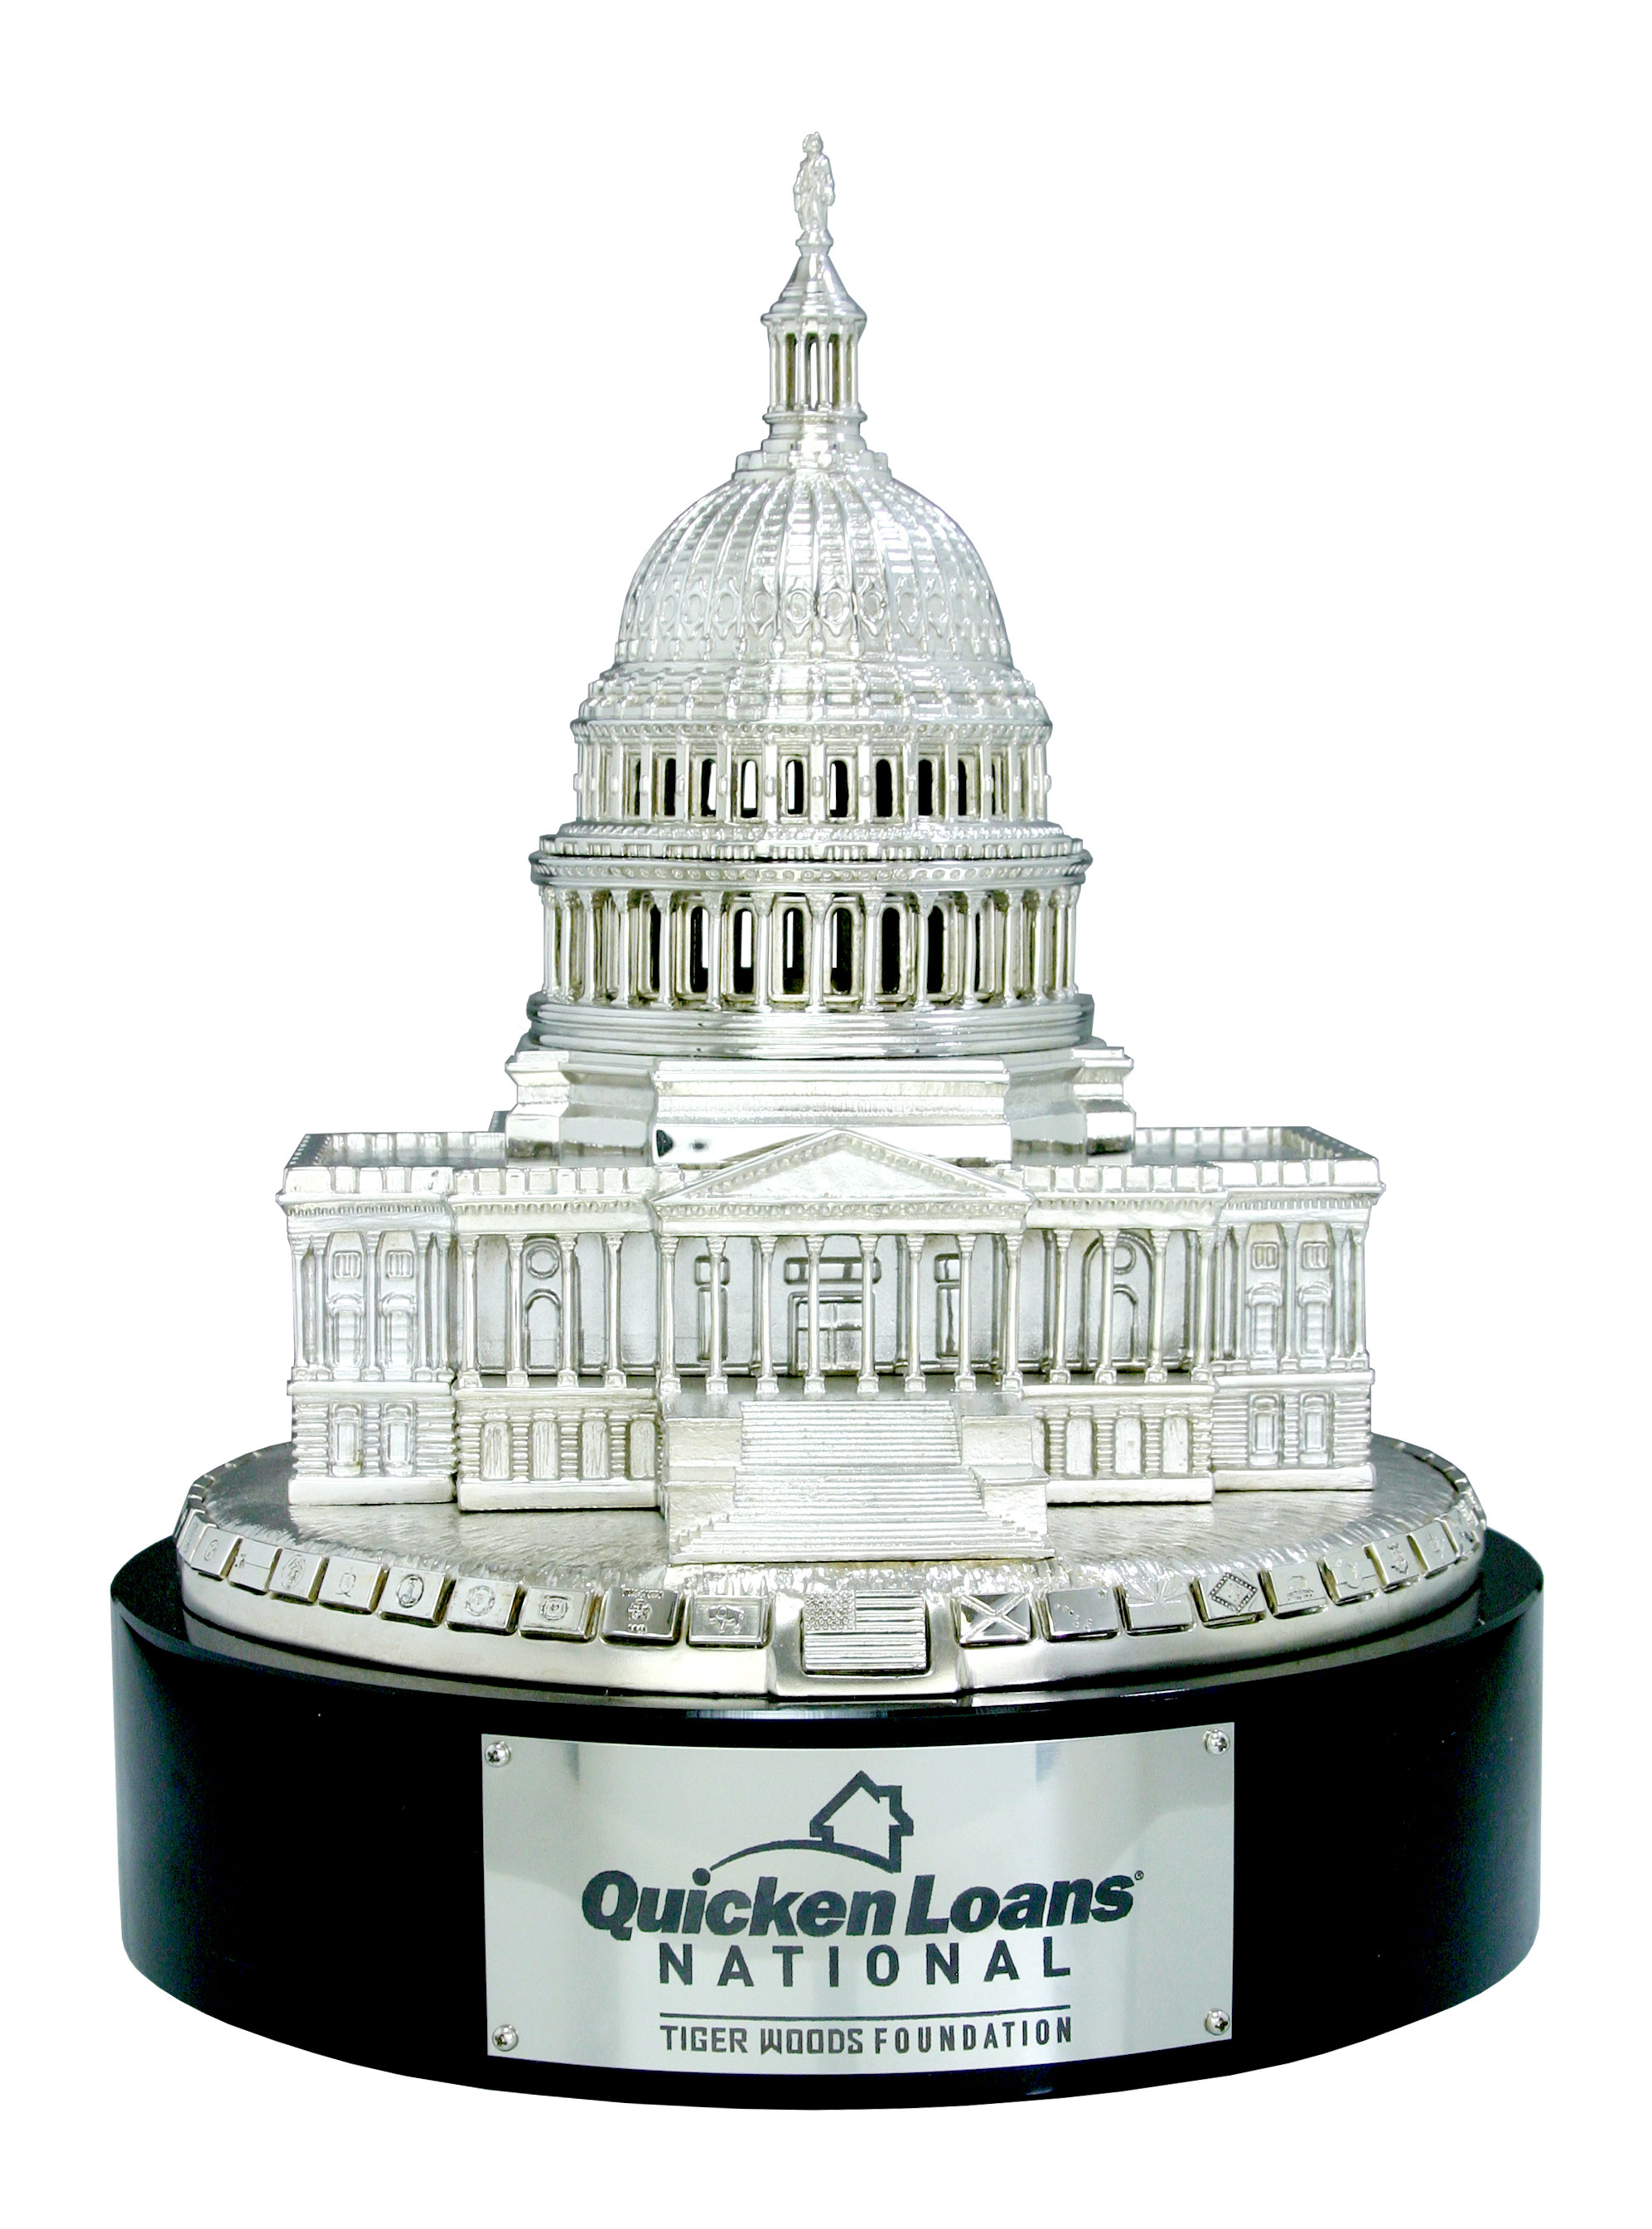 The National (AT&T National, Quicken Loans National) Capitol Building trophy made by Malcolm DeMille